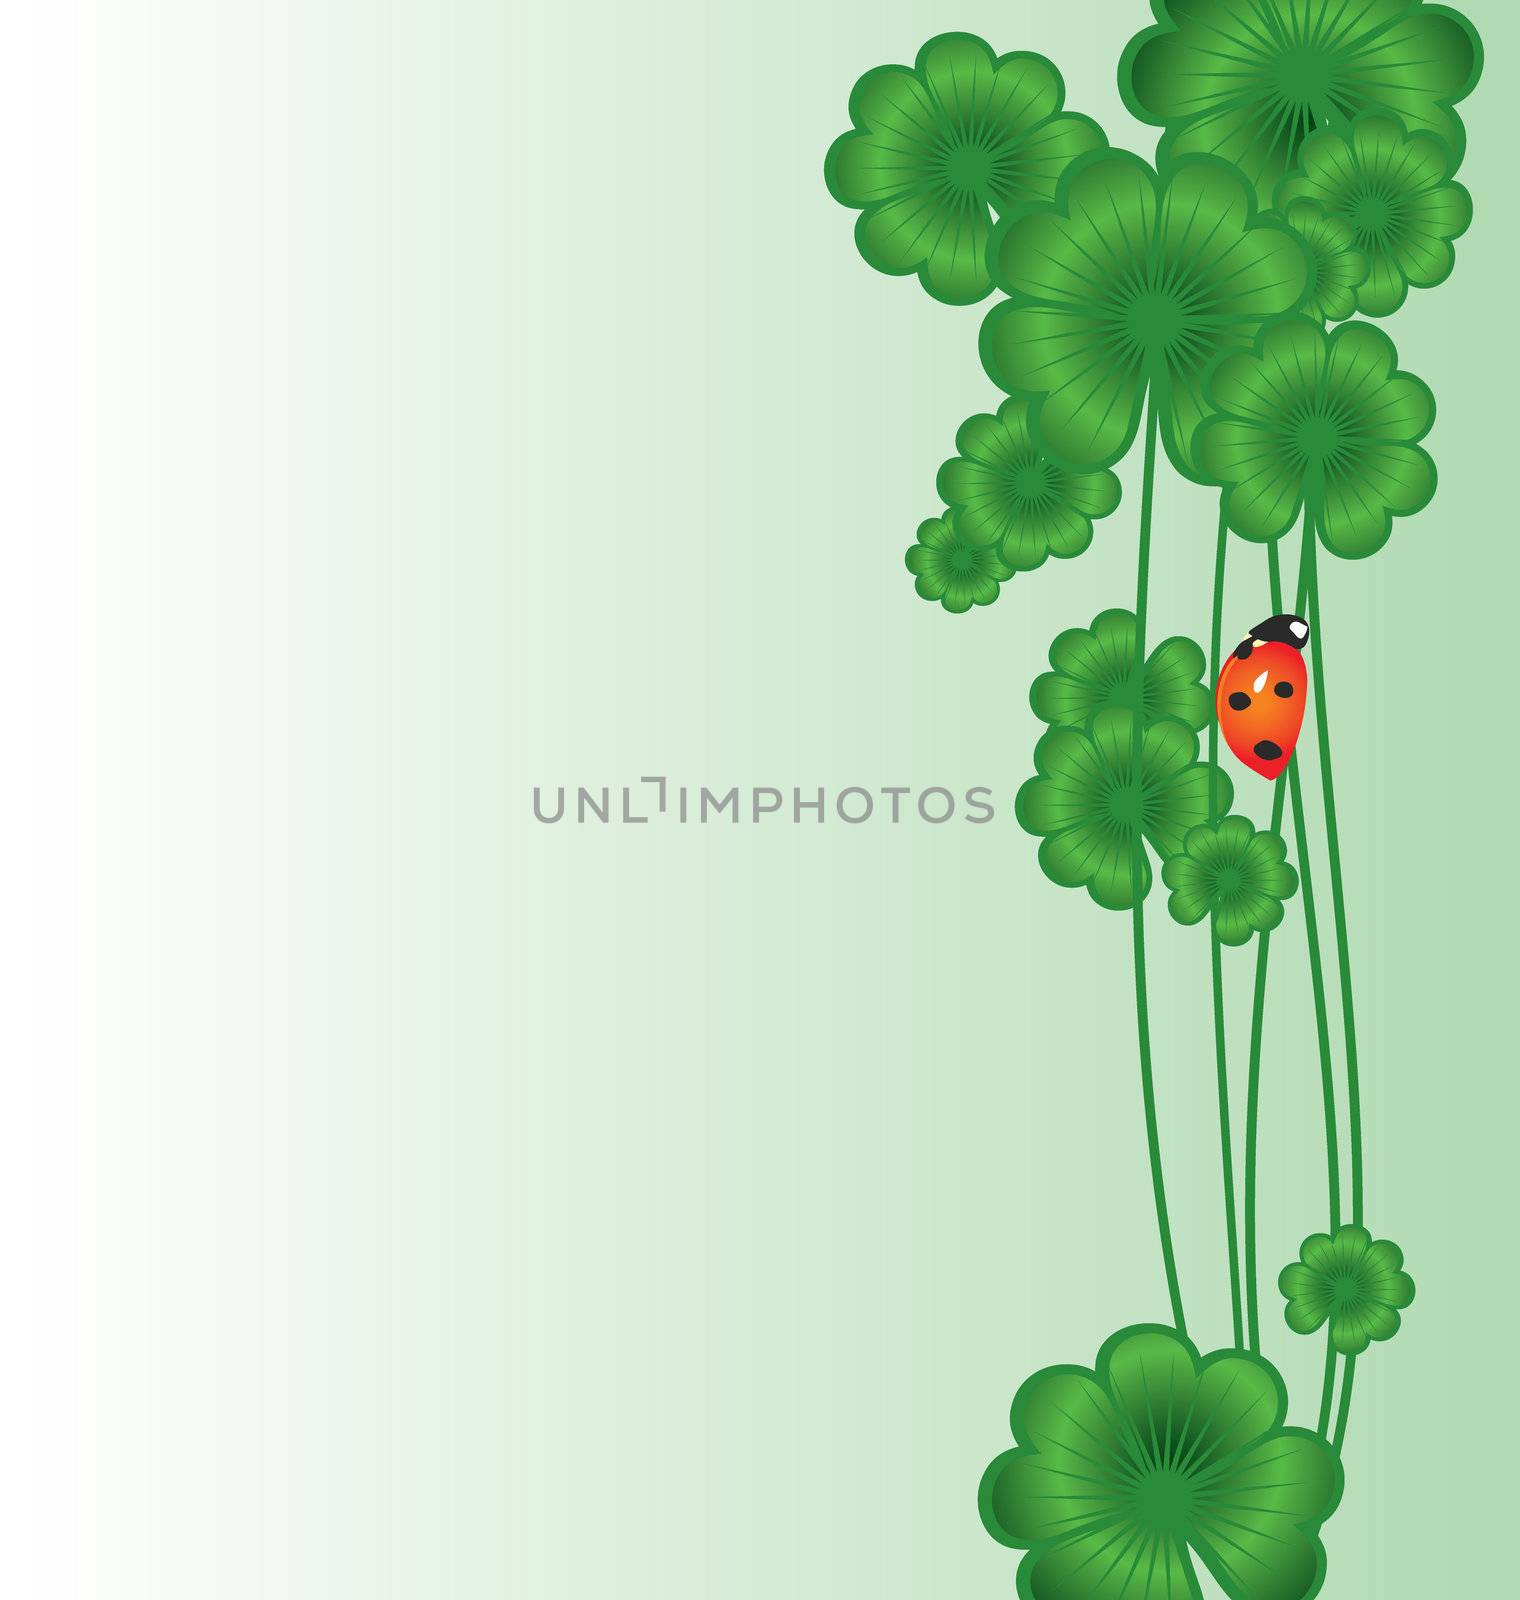 Clover vector border on white with ladybird for St. Patrick's da by CherJu